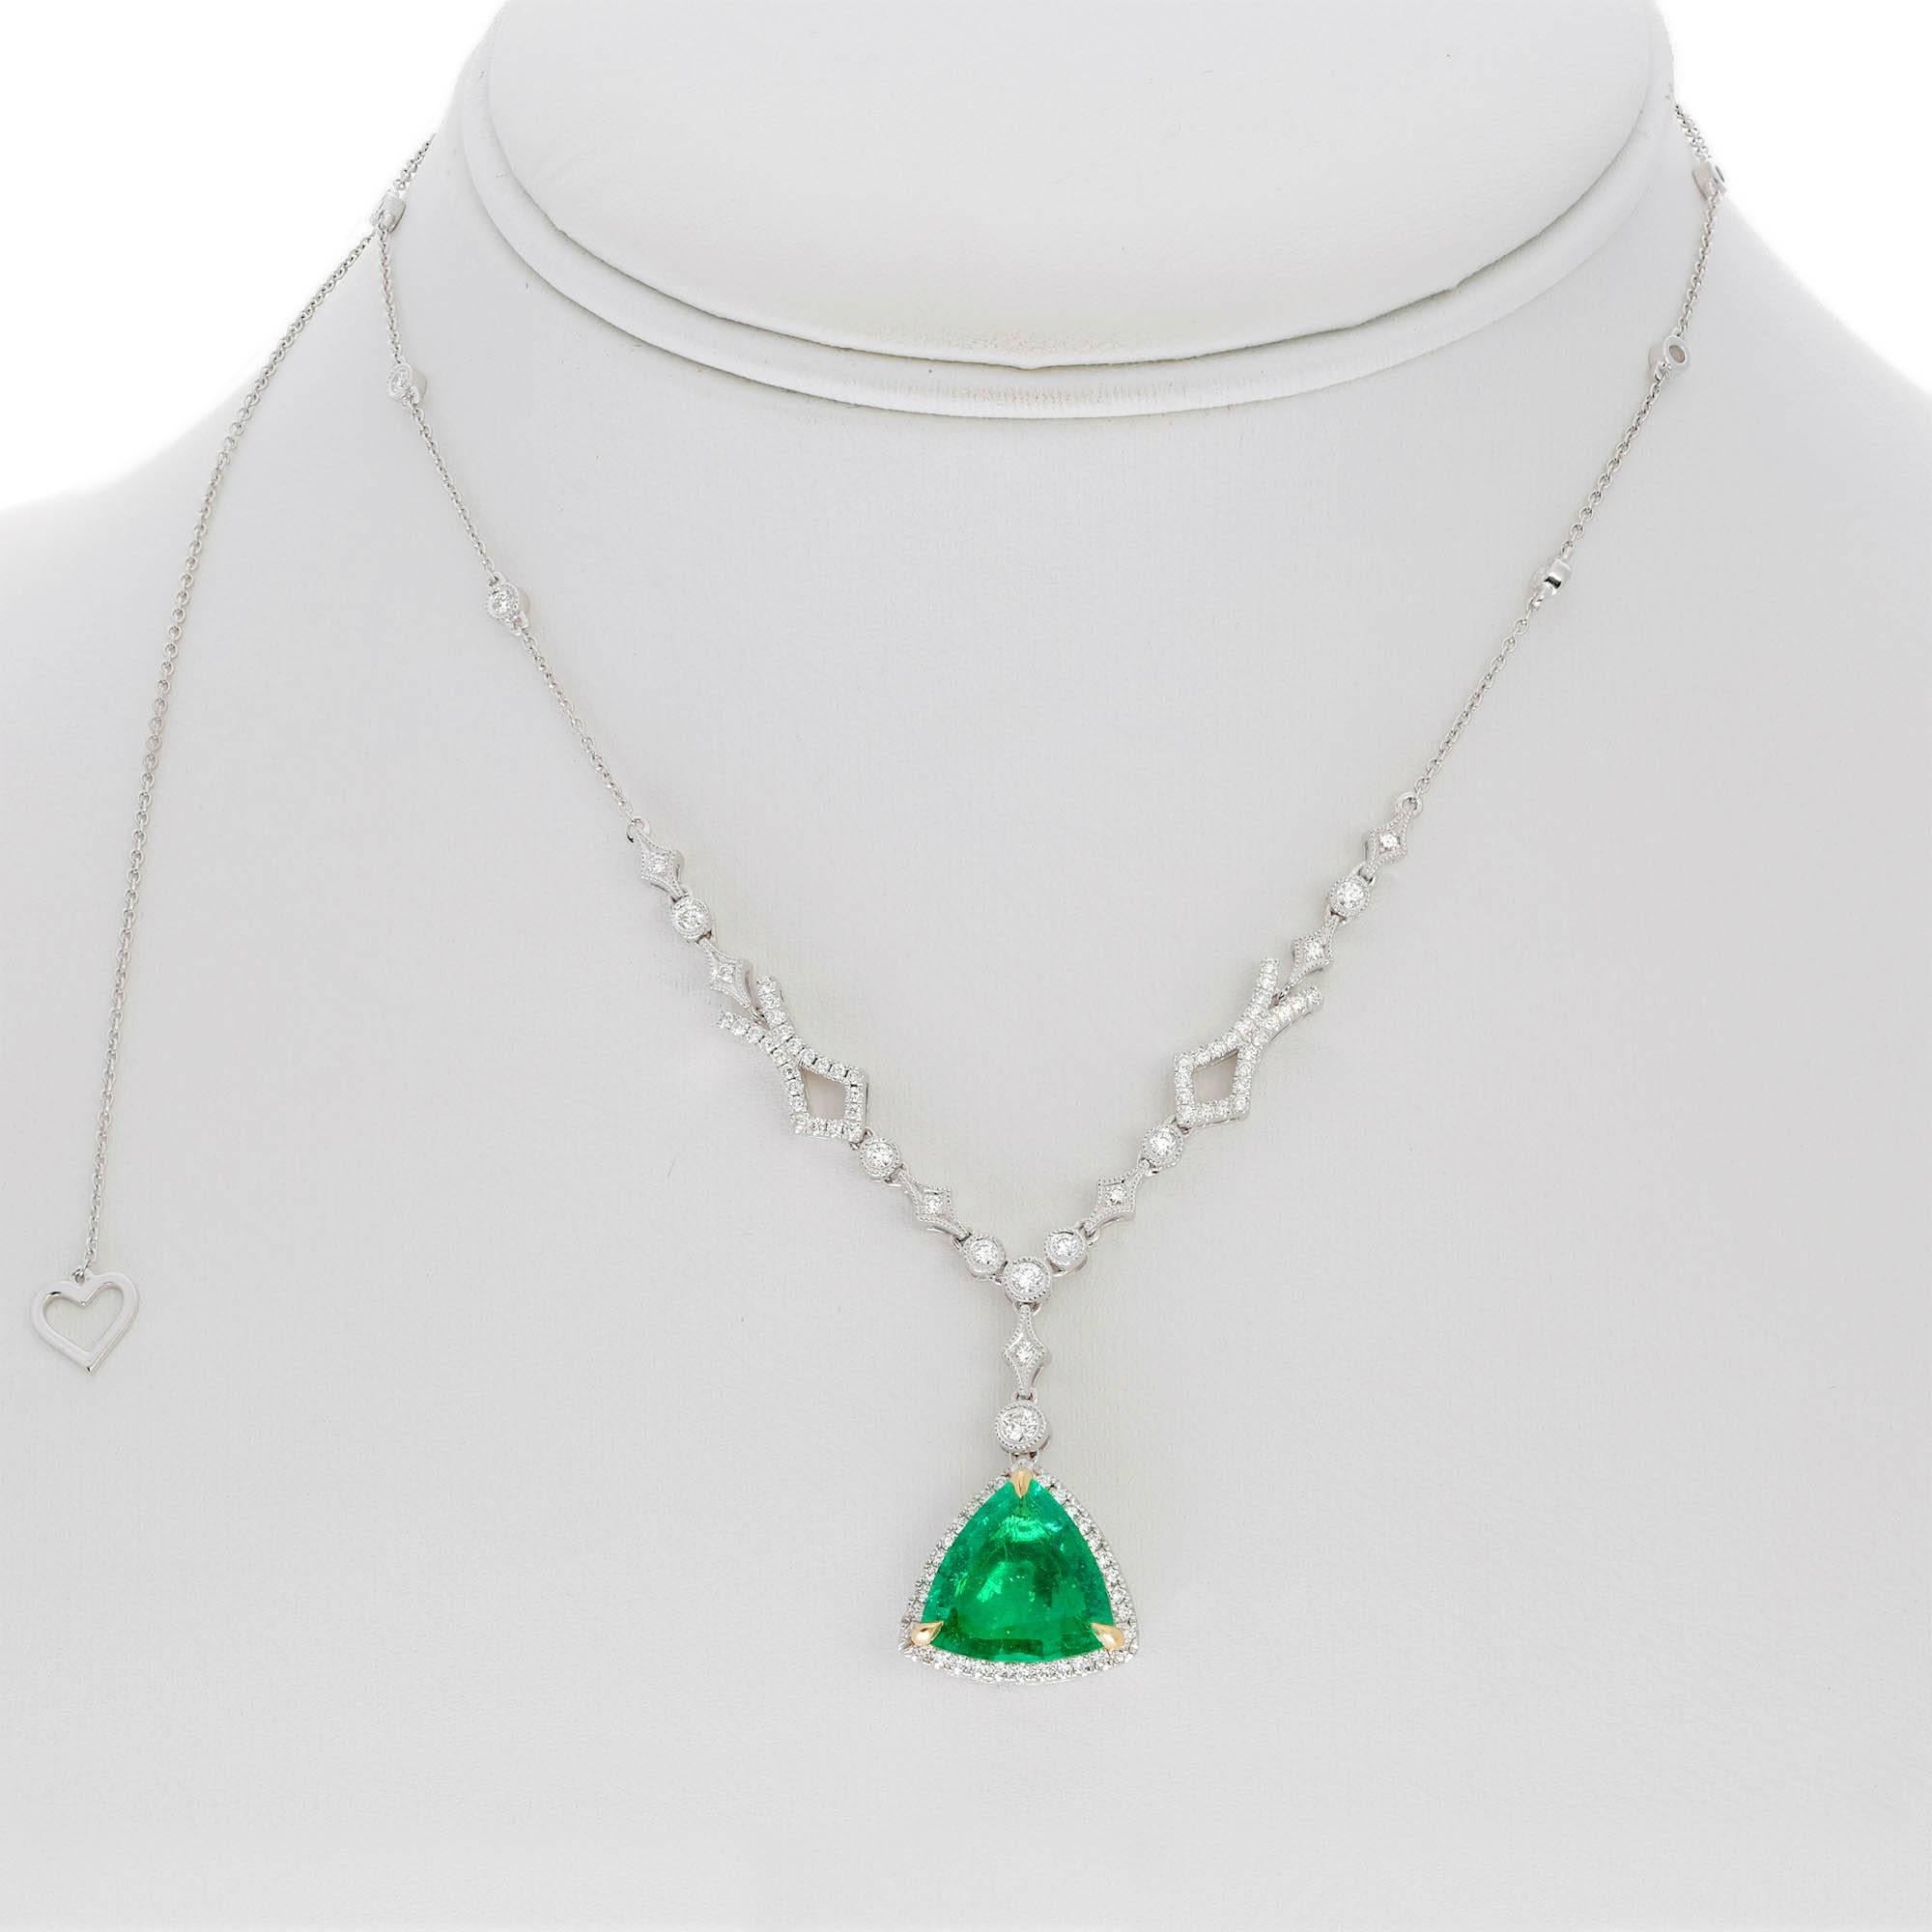 Trillion Cut Emerald hanging pendant in bezel set diamonds with milgrain edges.  Pendant in is set in 18k white gold. 

Emerald is one of the most powerful gemstones in history. Emerald is said to be ruled by the the planet Mercury, which is the